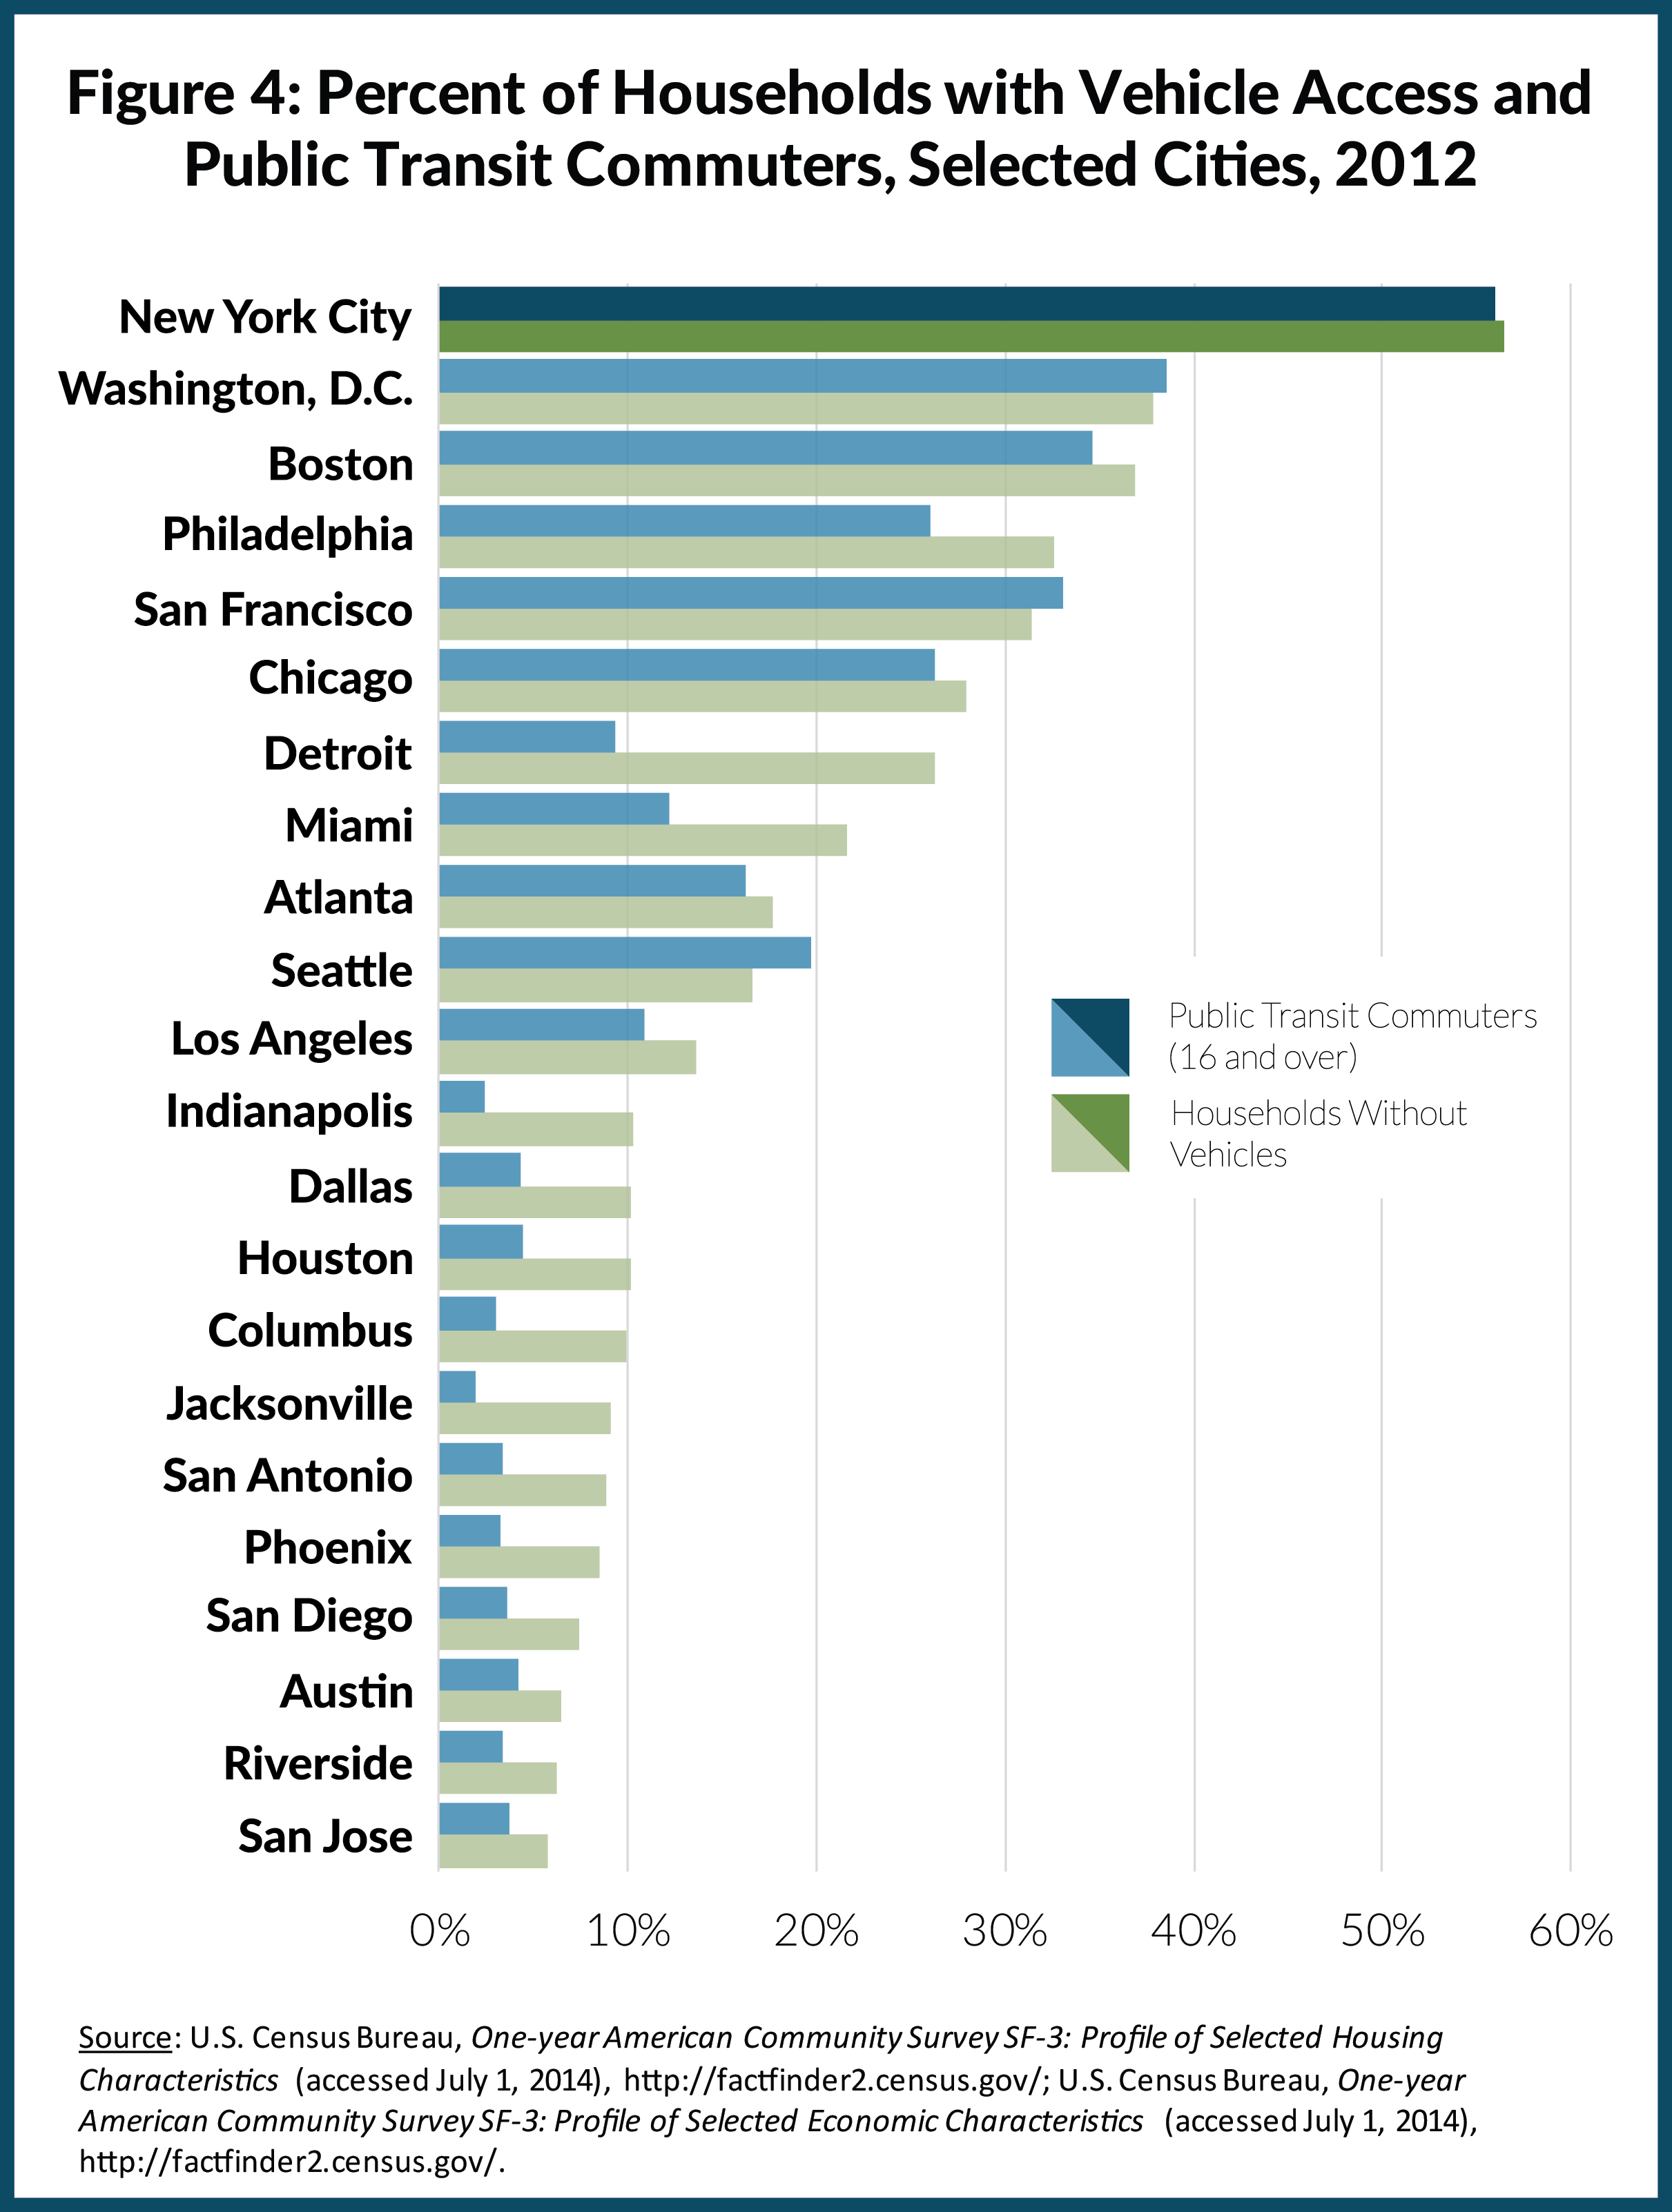 Figure 4: Percent of Households with Vehicle Access and Public Transit Commuters, Selected Cities, 2012